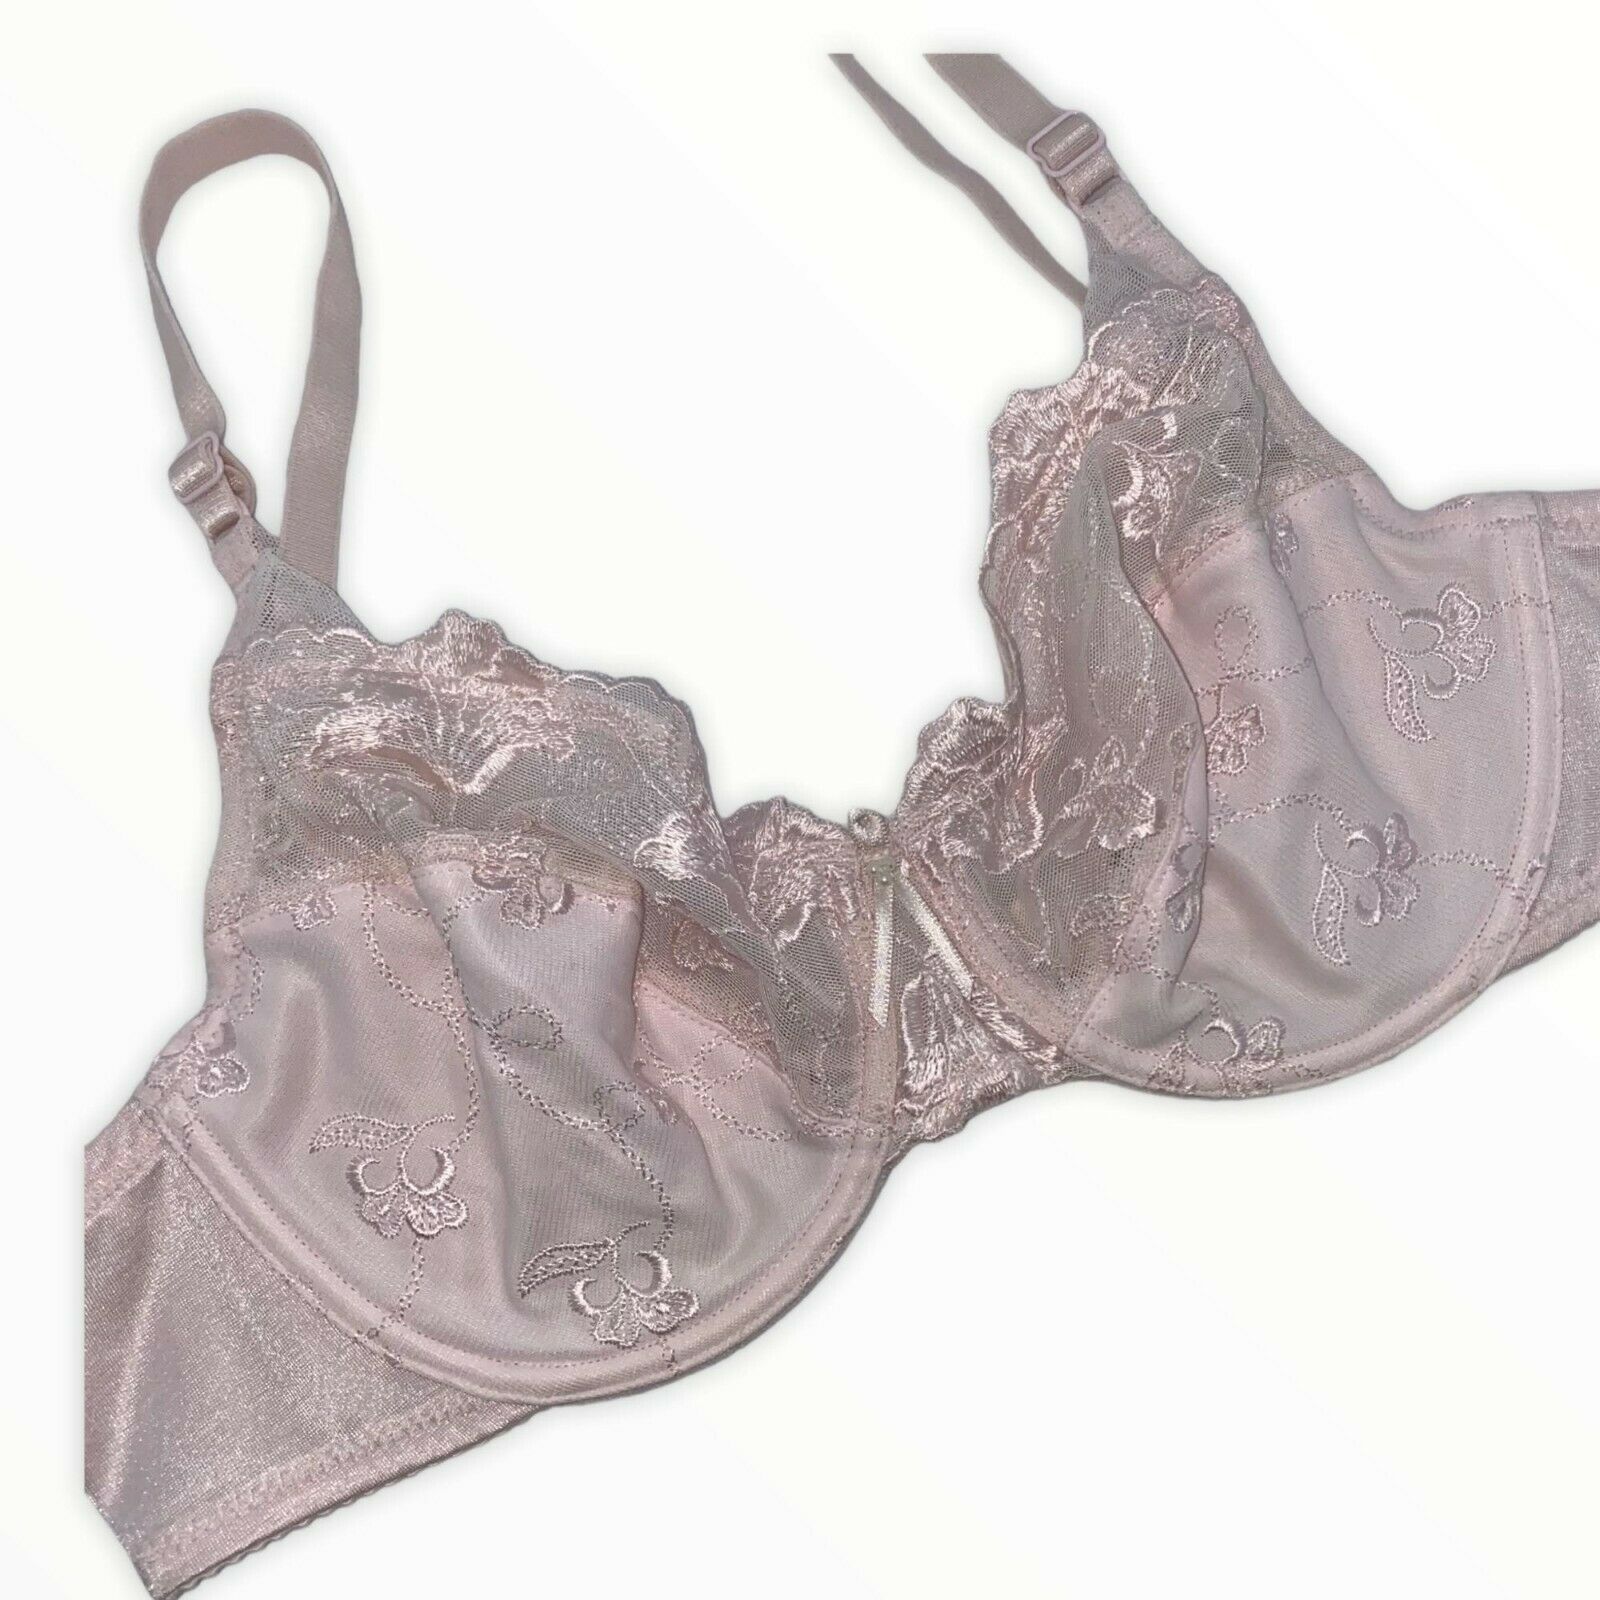 Wacoal 36B #85133 Undewire Bra Floral and 50 similar items